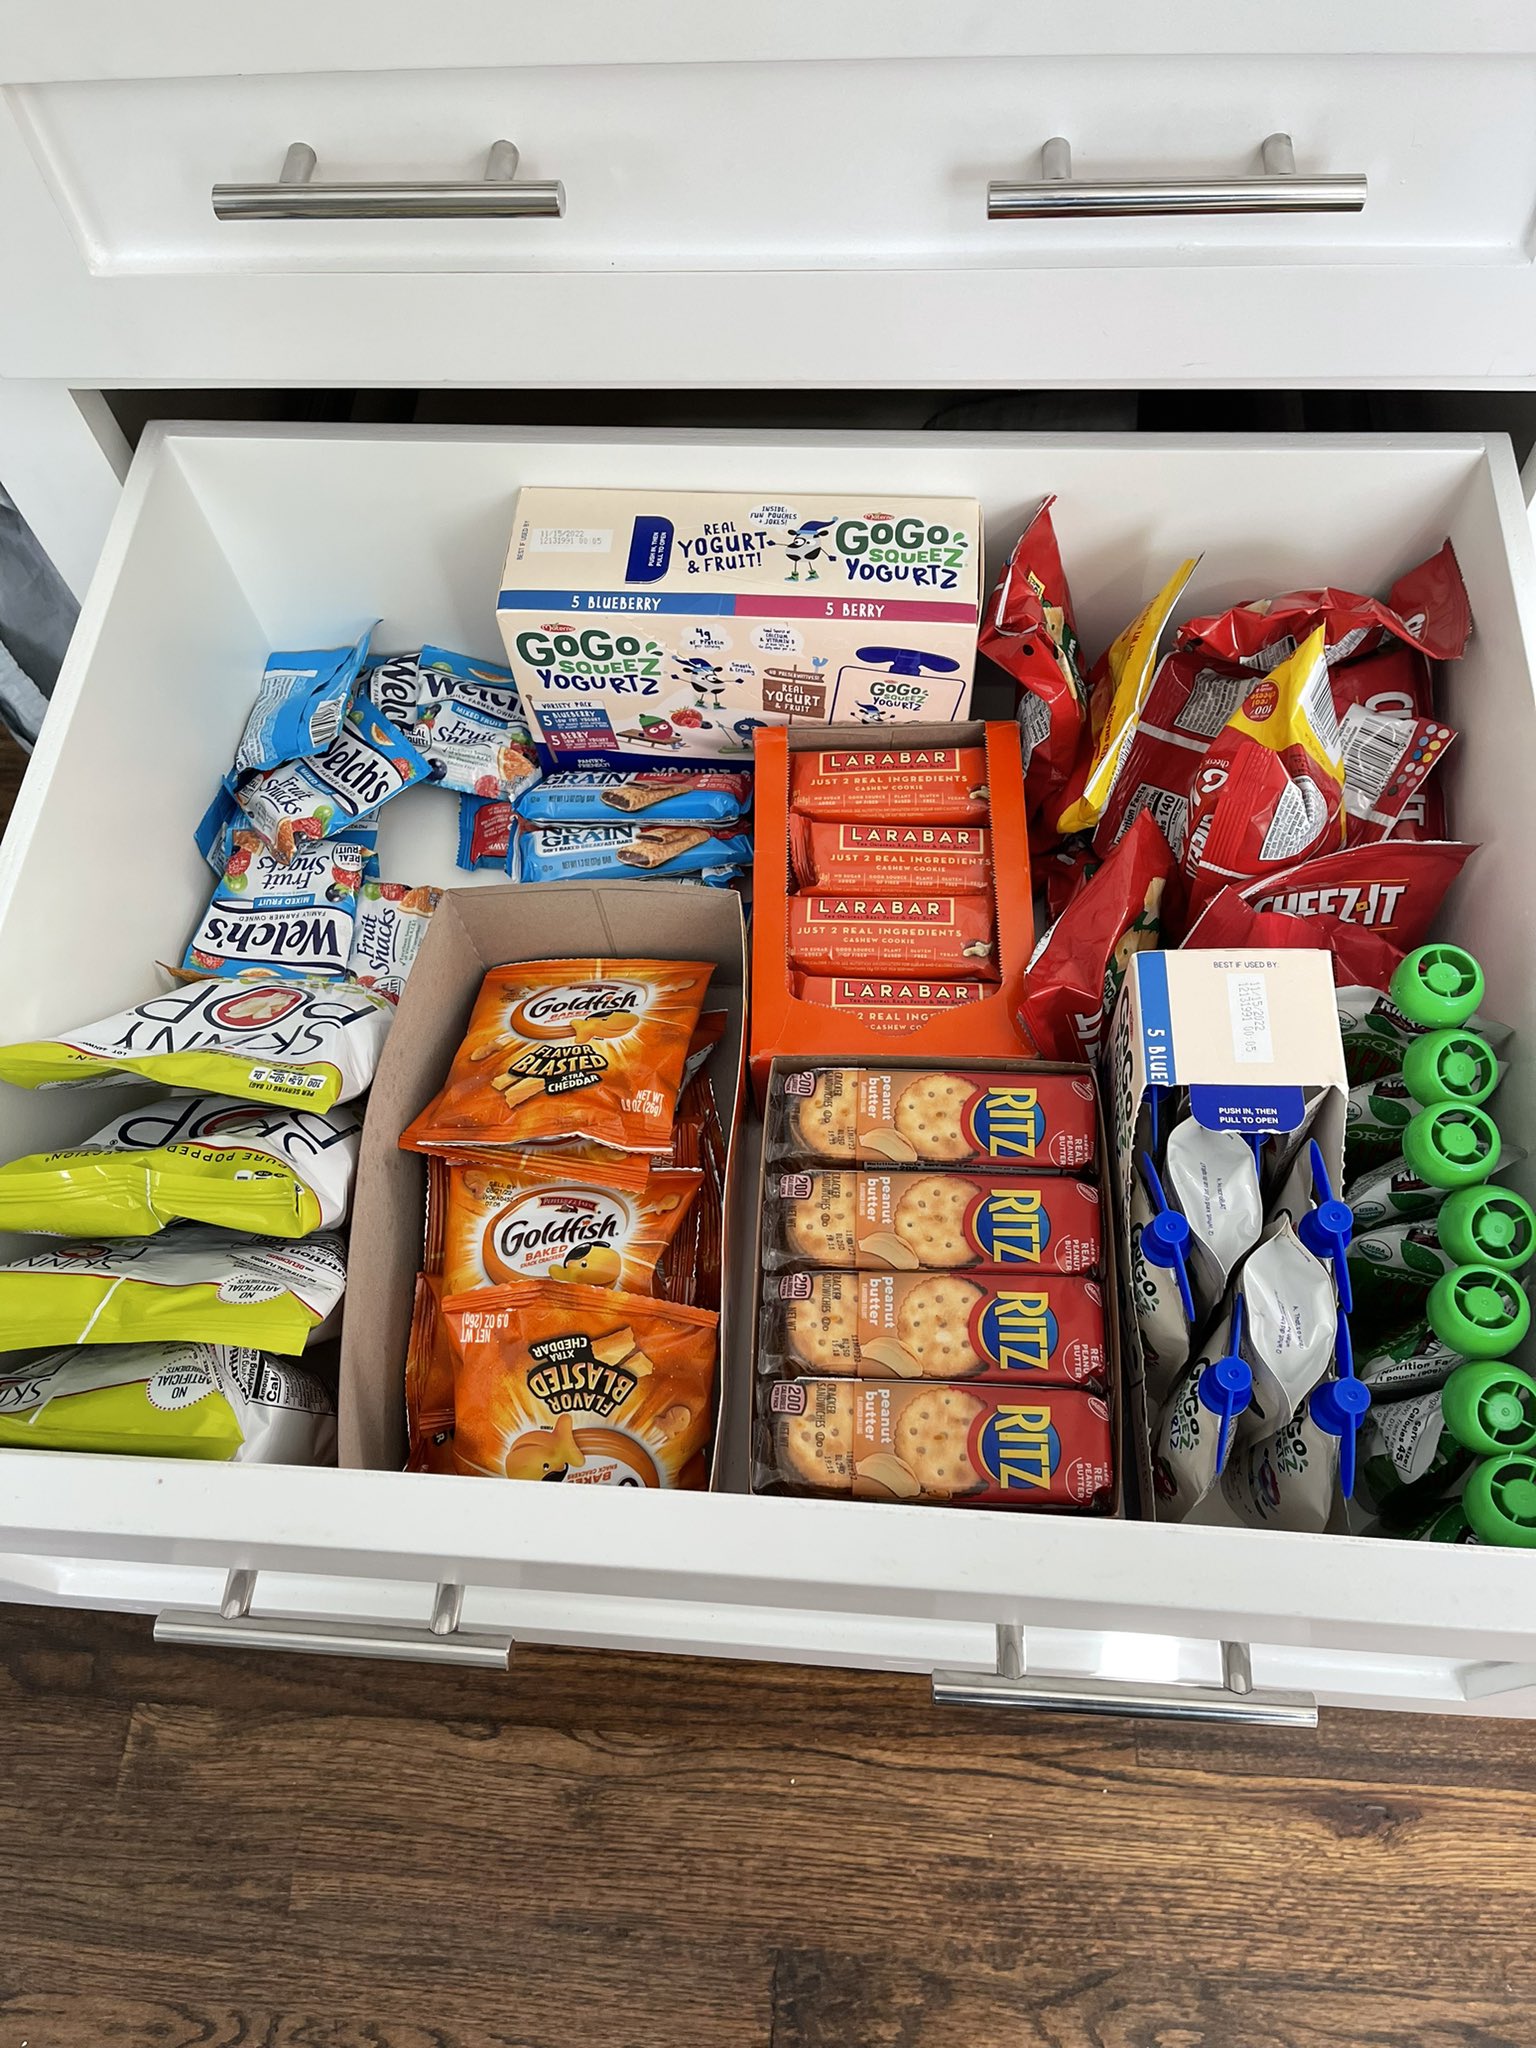 Michelle Kay Camp on X: How long do you think this snack drawer